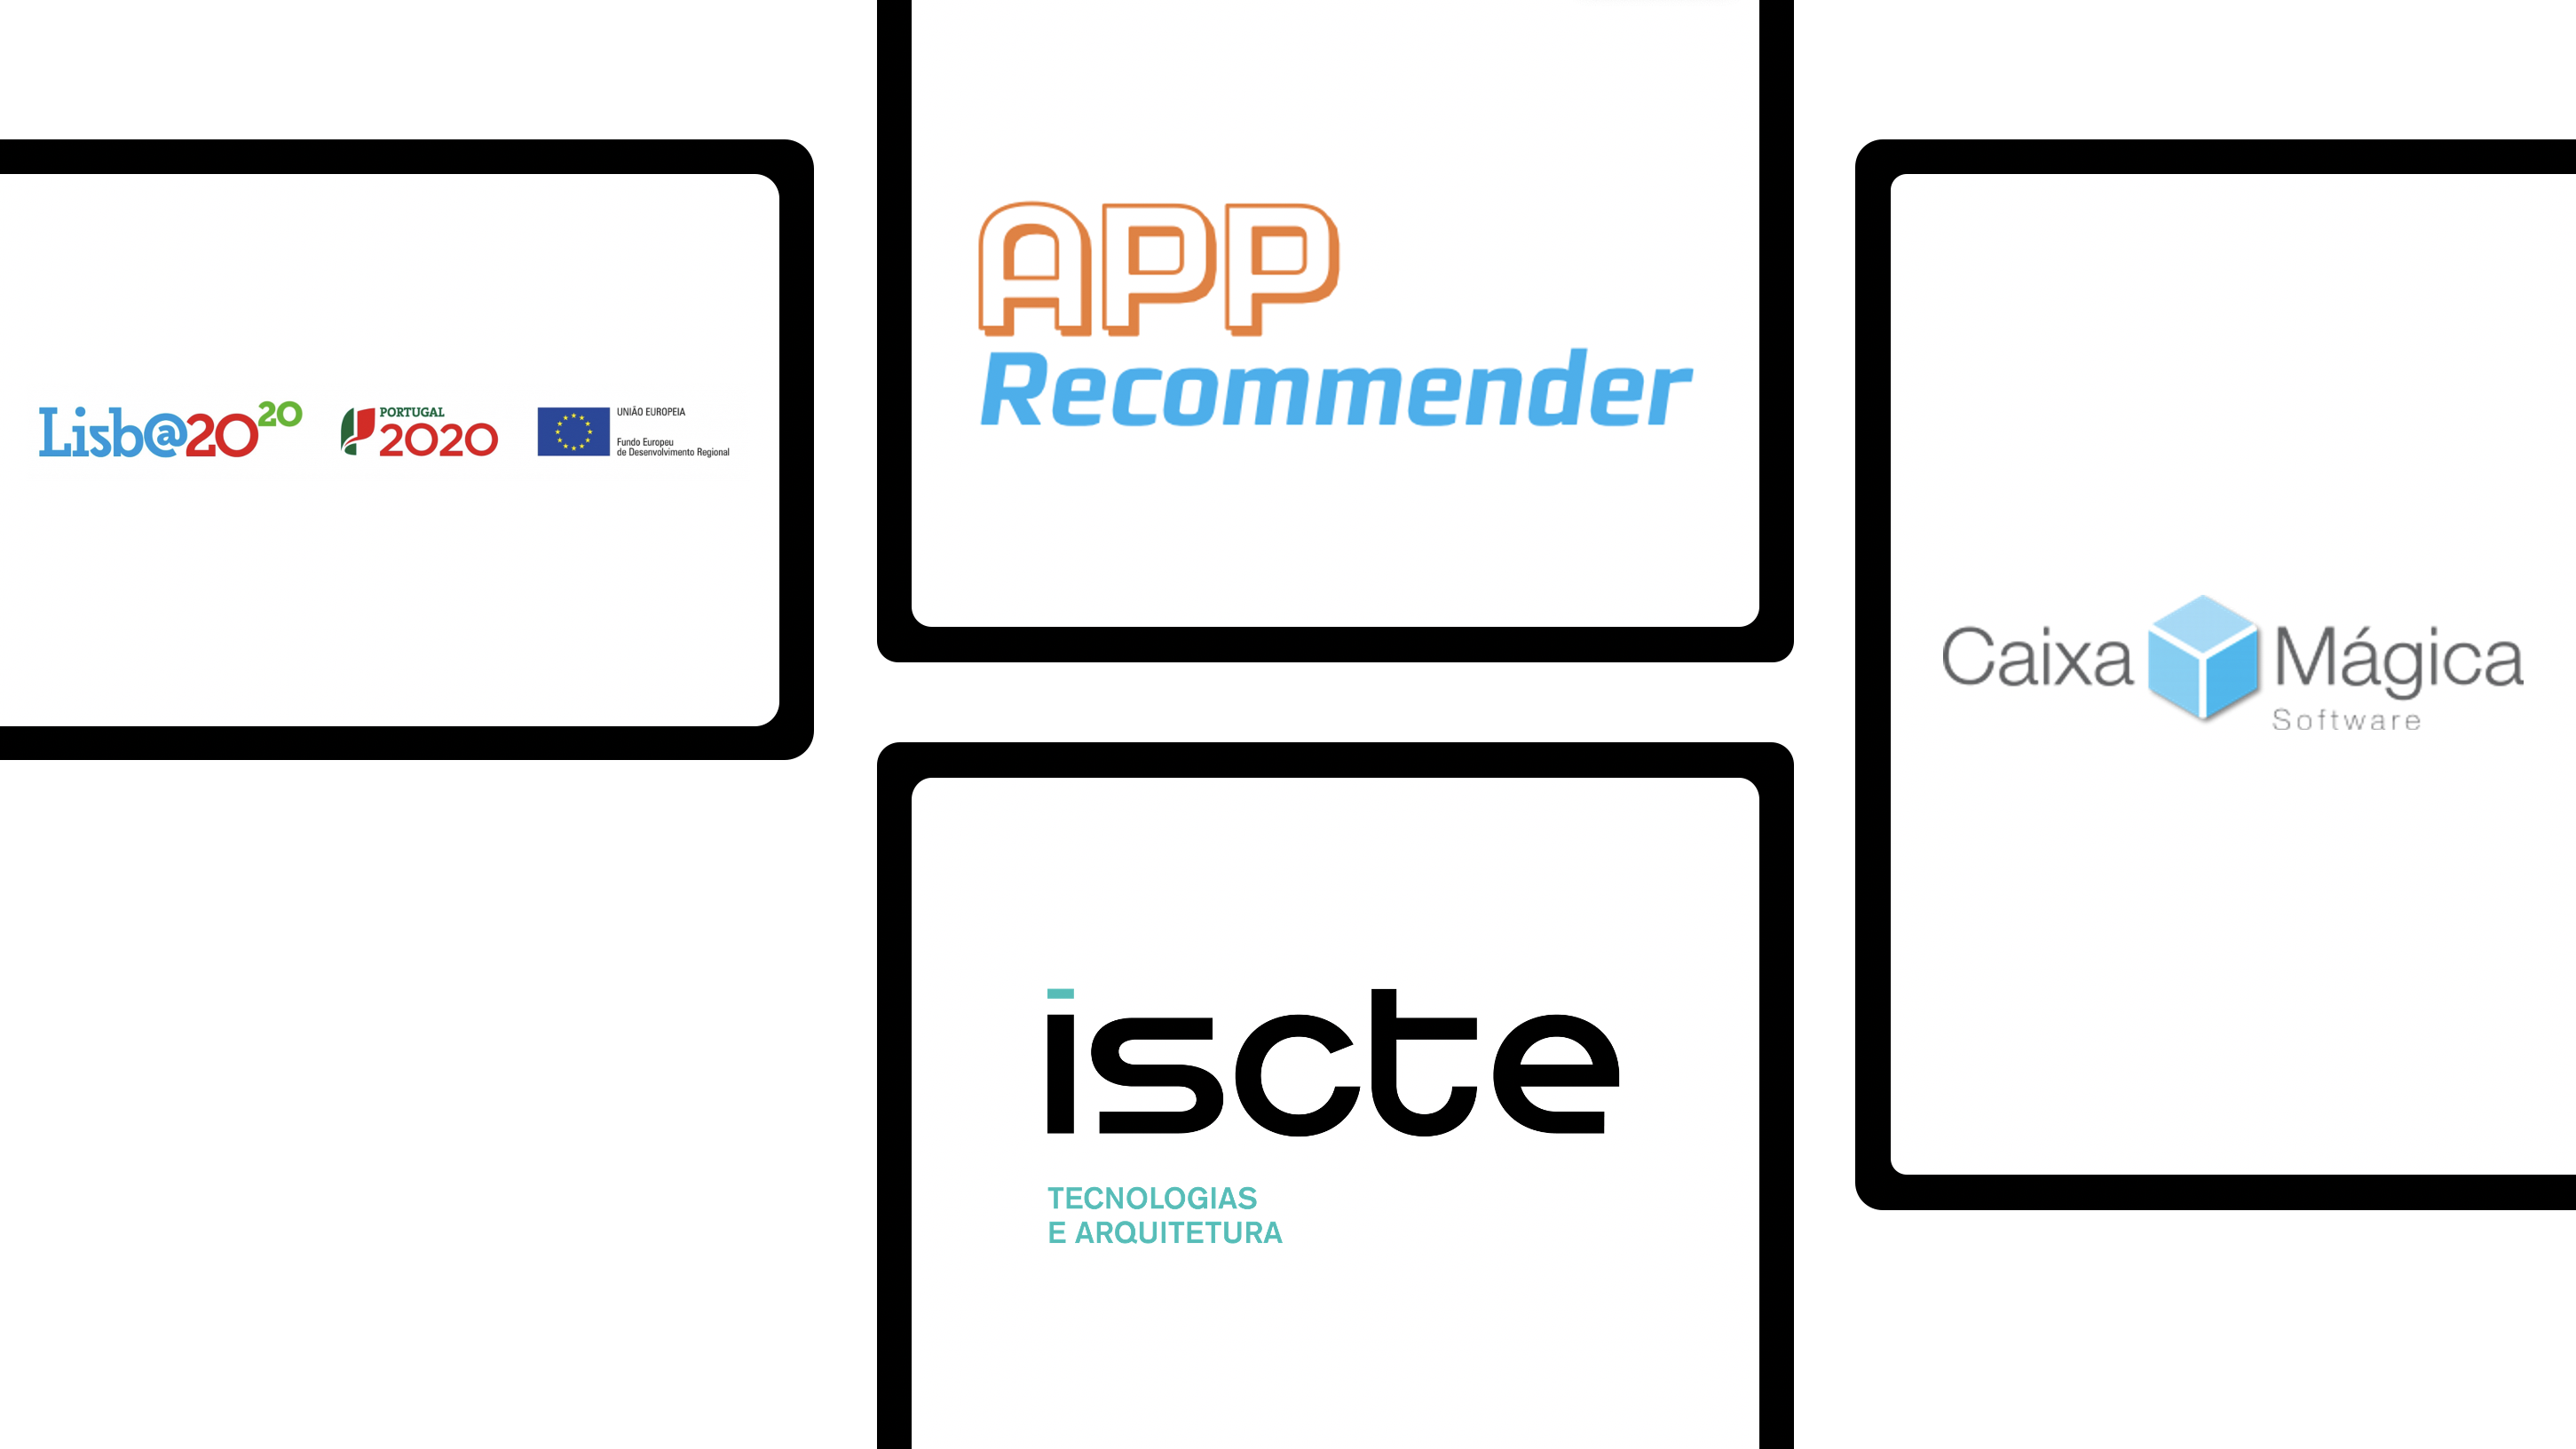 AppRecommender